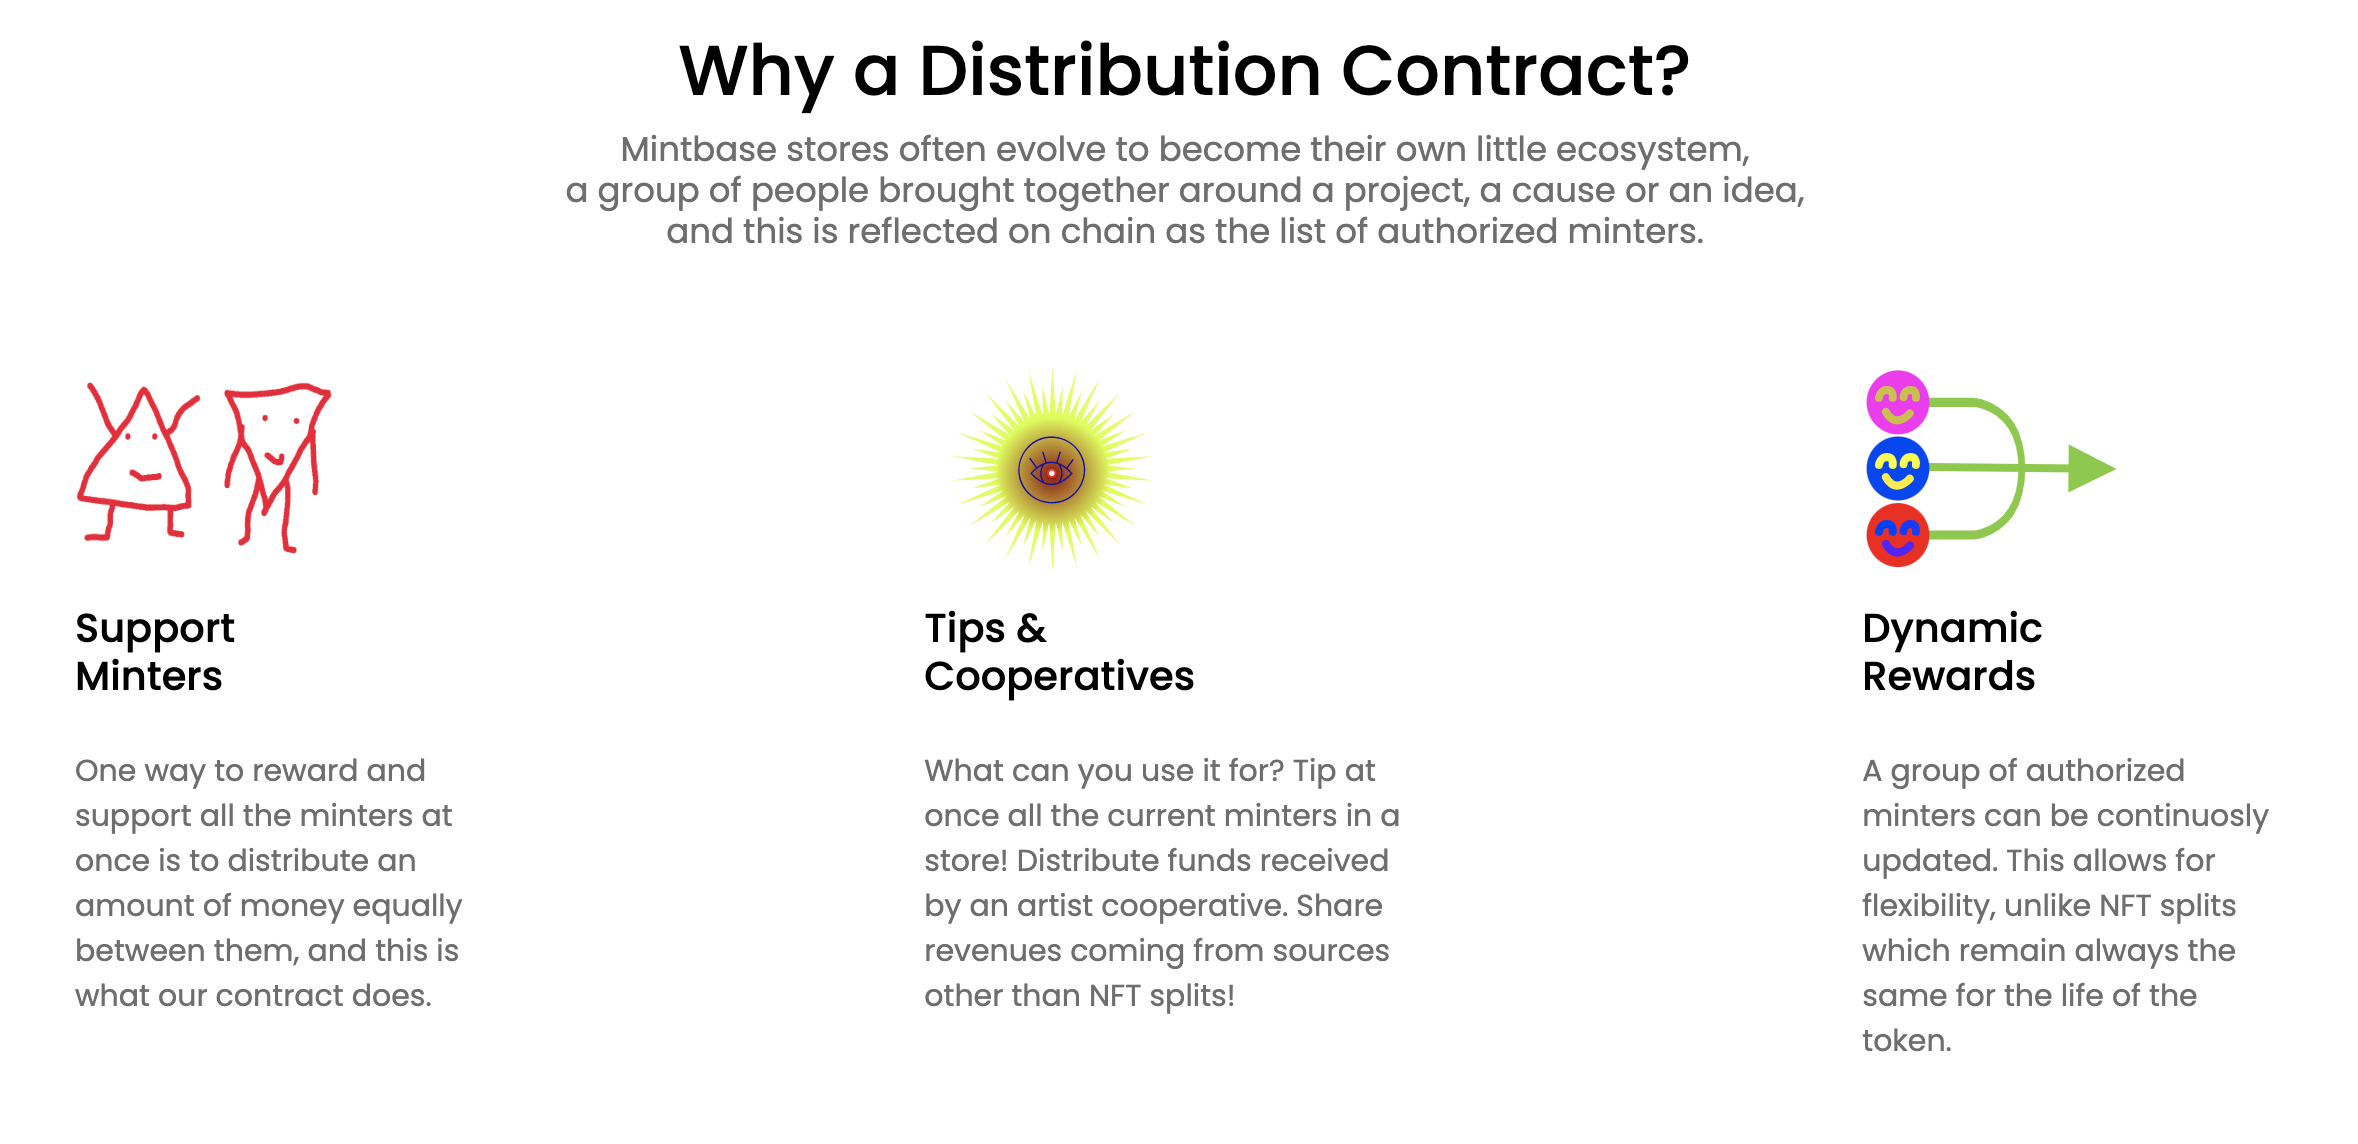 Why a distribution contract